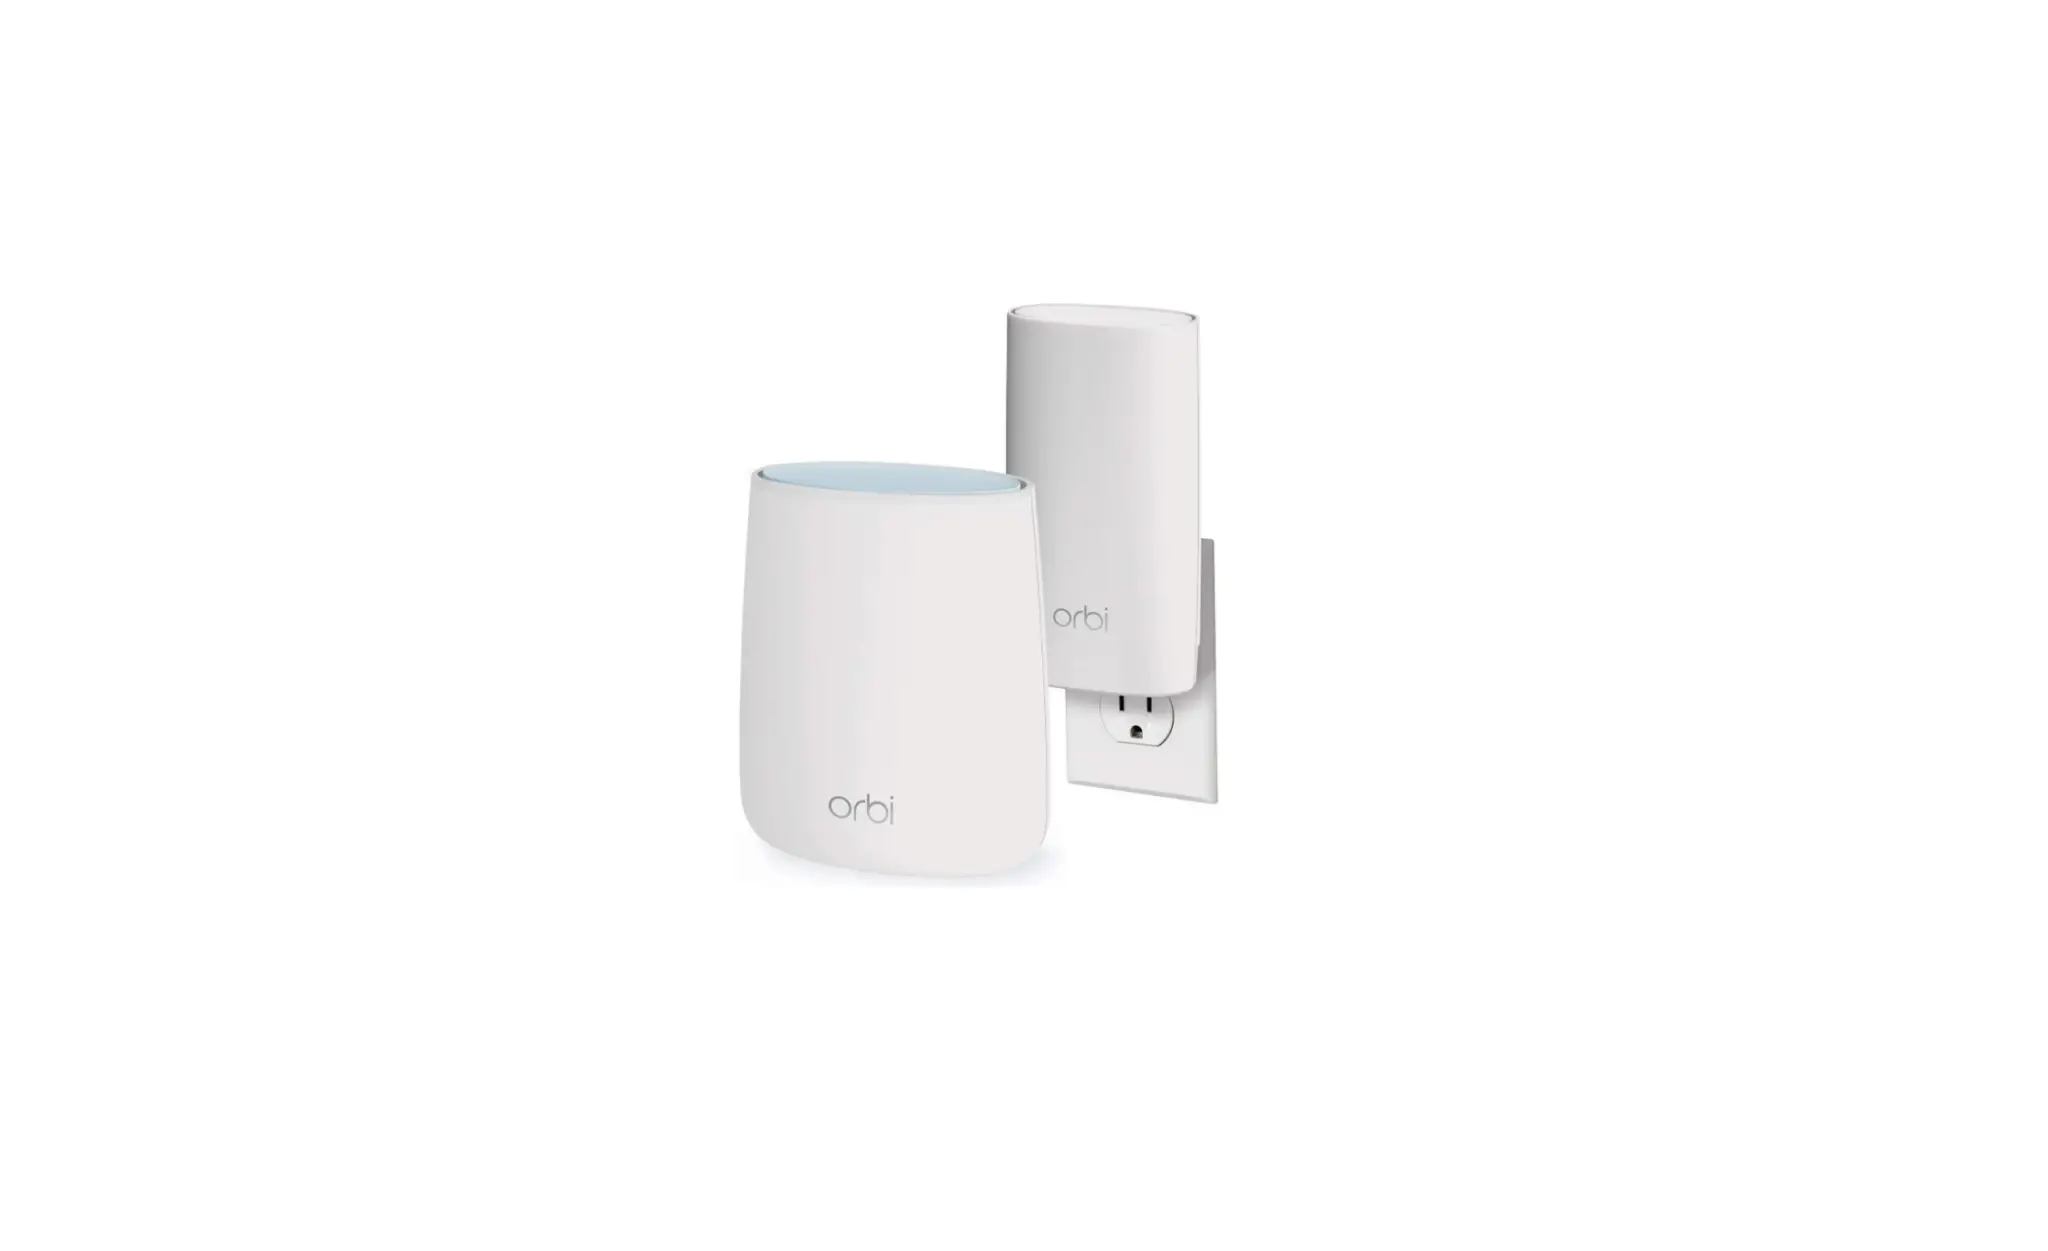 Orbi Compact Wall-Plug Whole Home Mesh WiFi System - WiFi router and wall-plug satellite extender